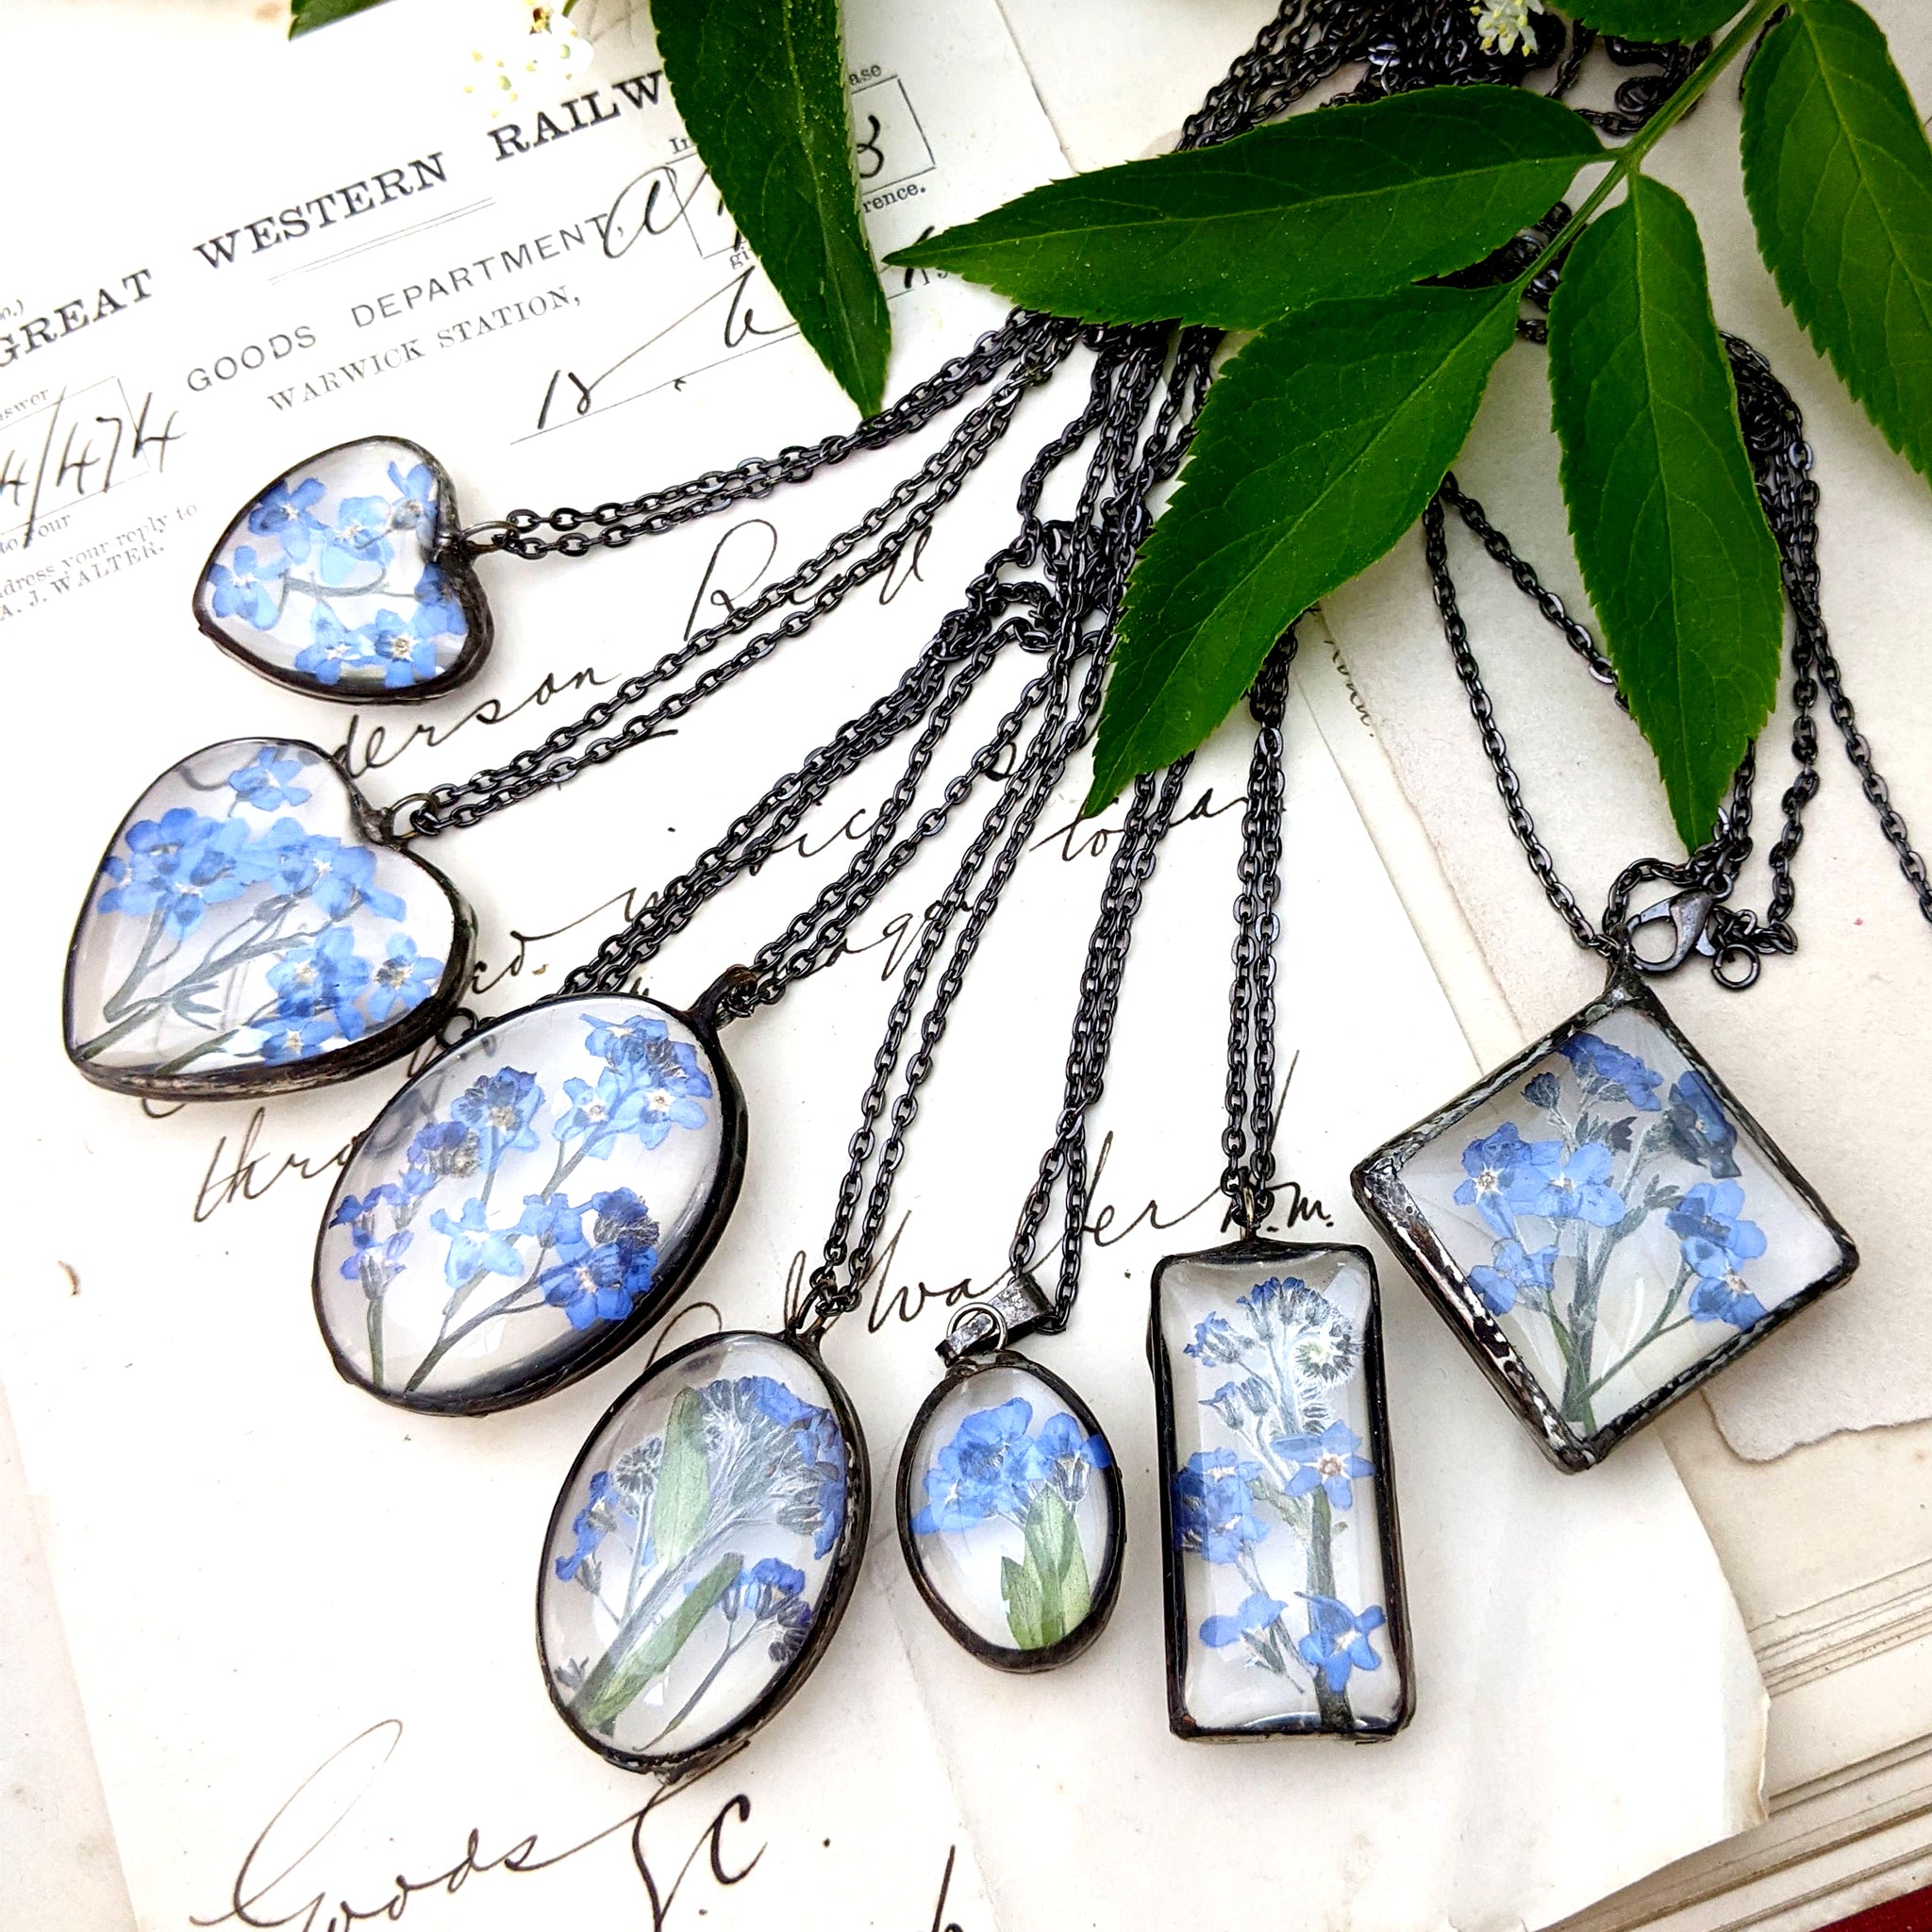  Forget-me-not necklaces lying one by another